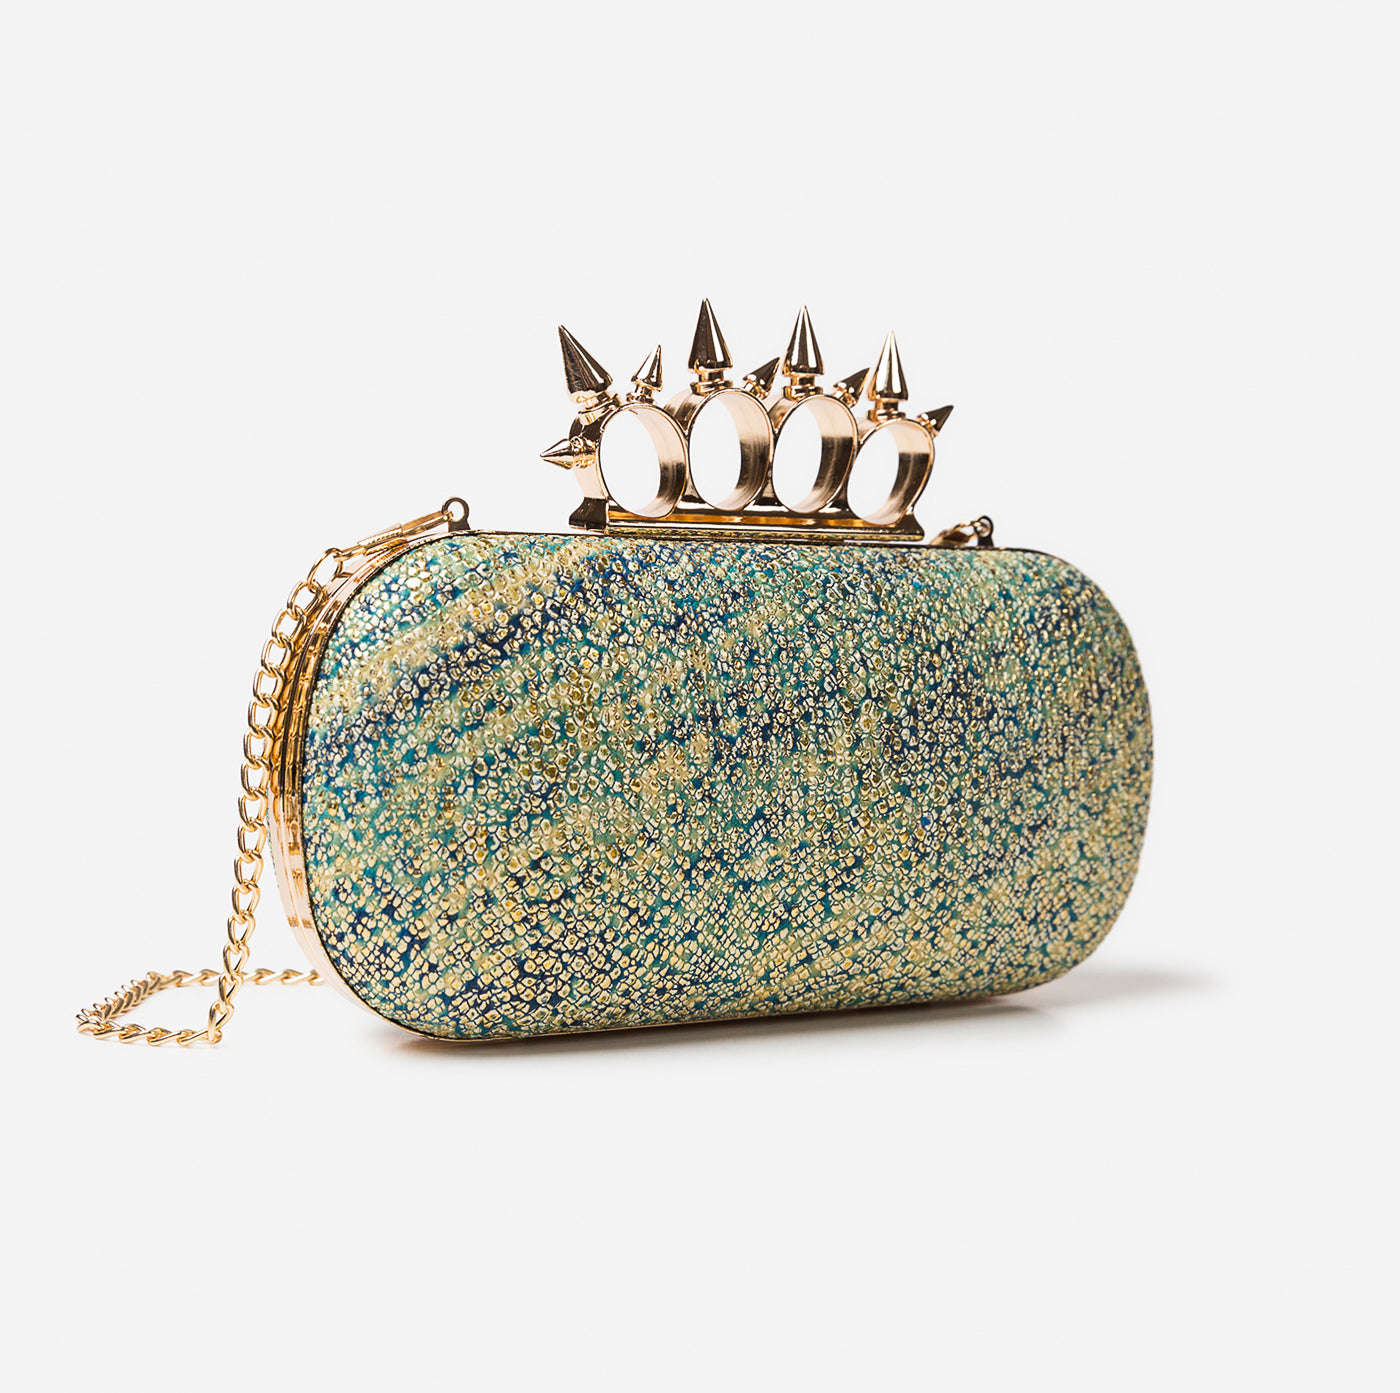 Golden Clutch Bag for Special Occasions in Pakistan